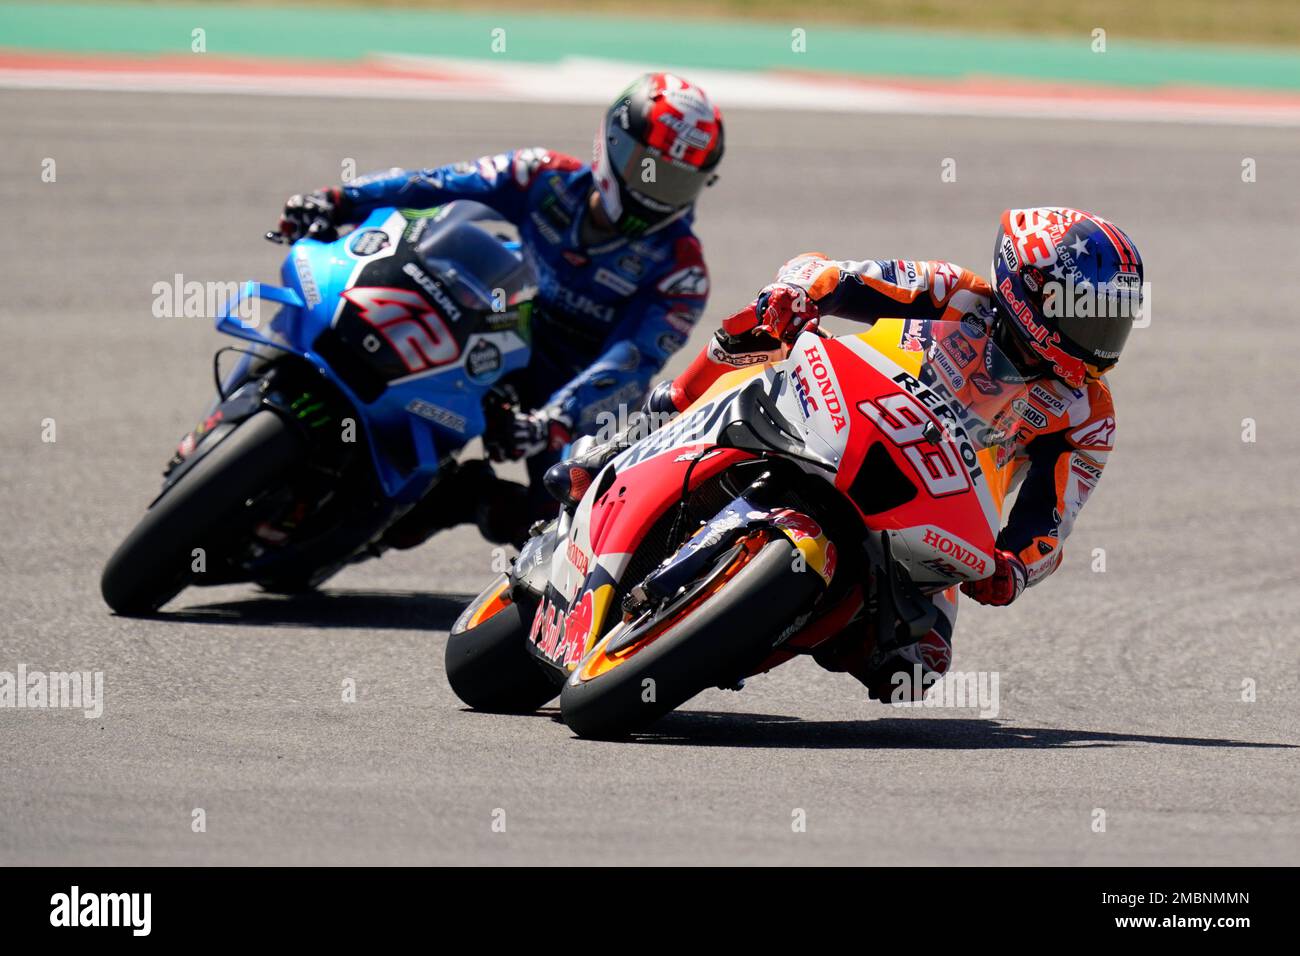 Marc Marquez (93), of Spain, leads Alex Rins (42), of Spain, through a turn  during qualifying for the MotoGP Grand Prix of the Americas motorcycle race  at the Circuit of the Americas,